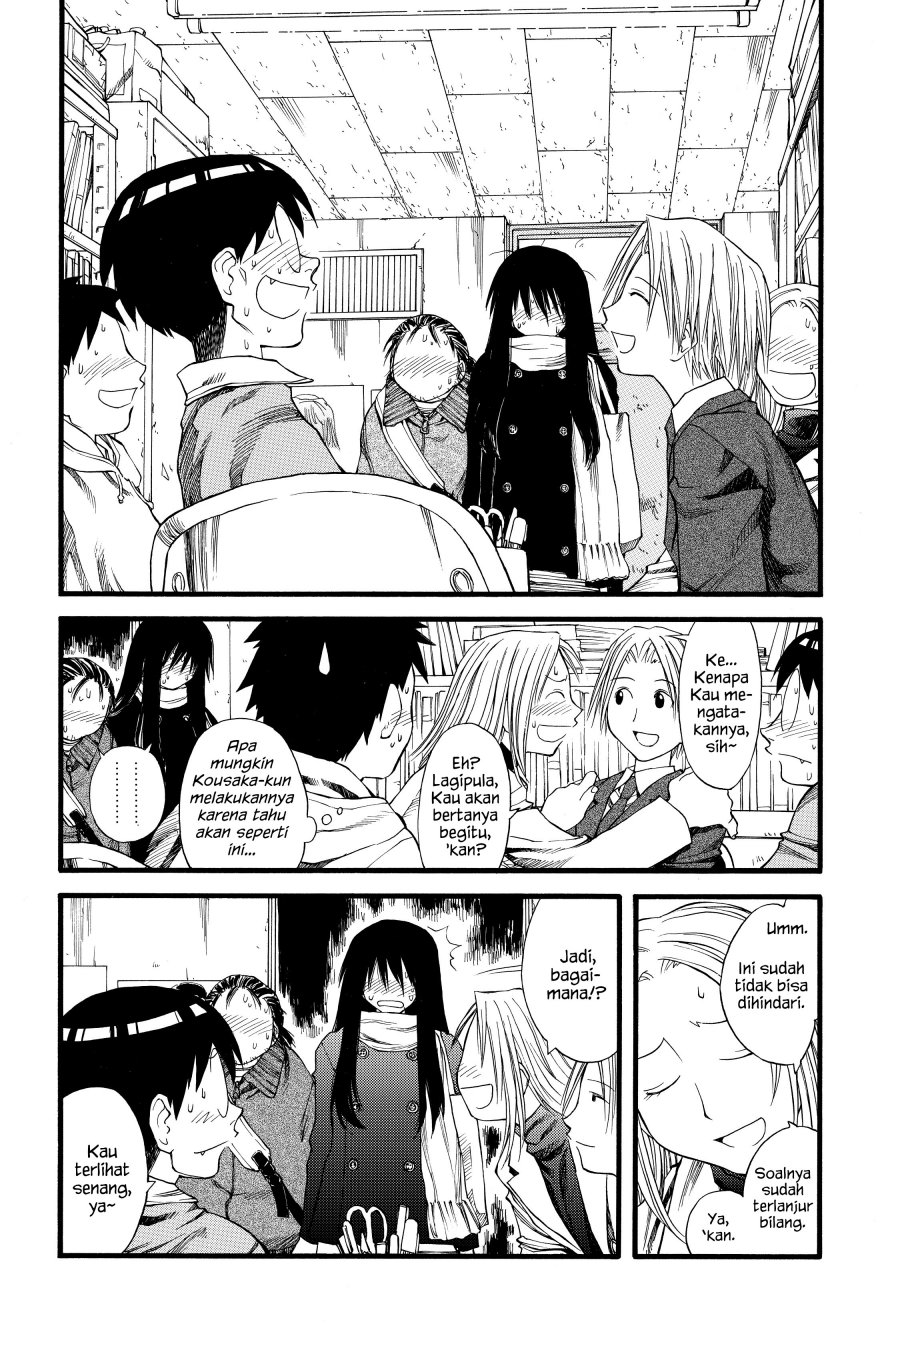 Genshiken – The Society for the Study of Modern Visual Culture Chapter 23 Image 8